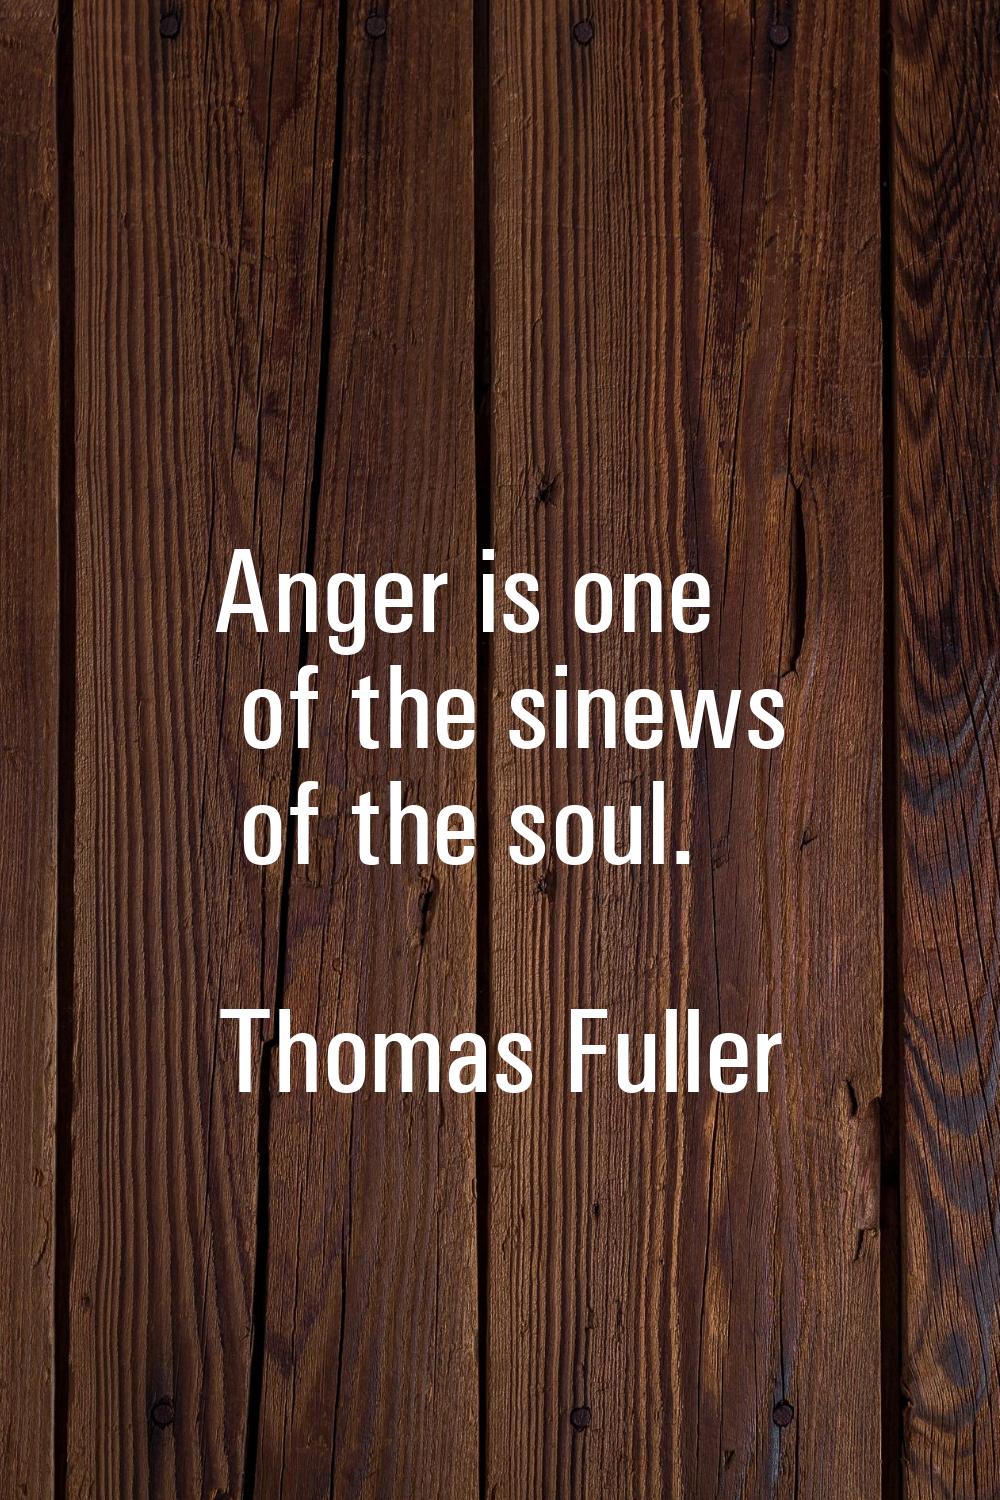 Anger is one of the sinews of the soul.